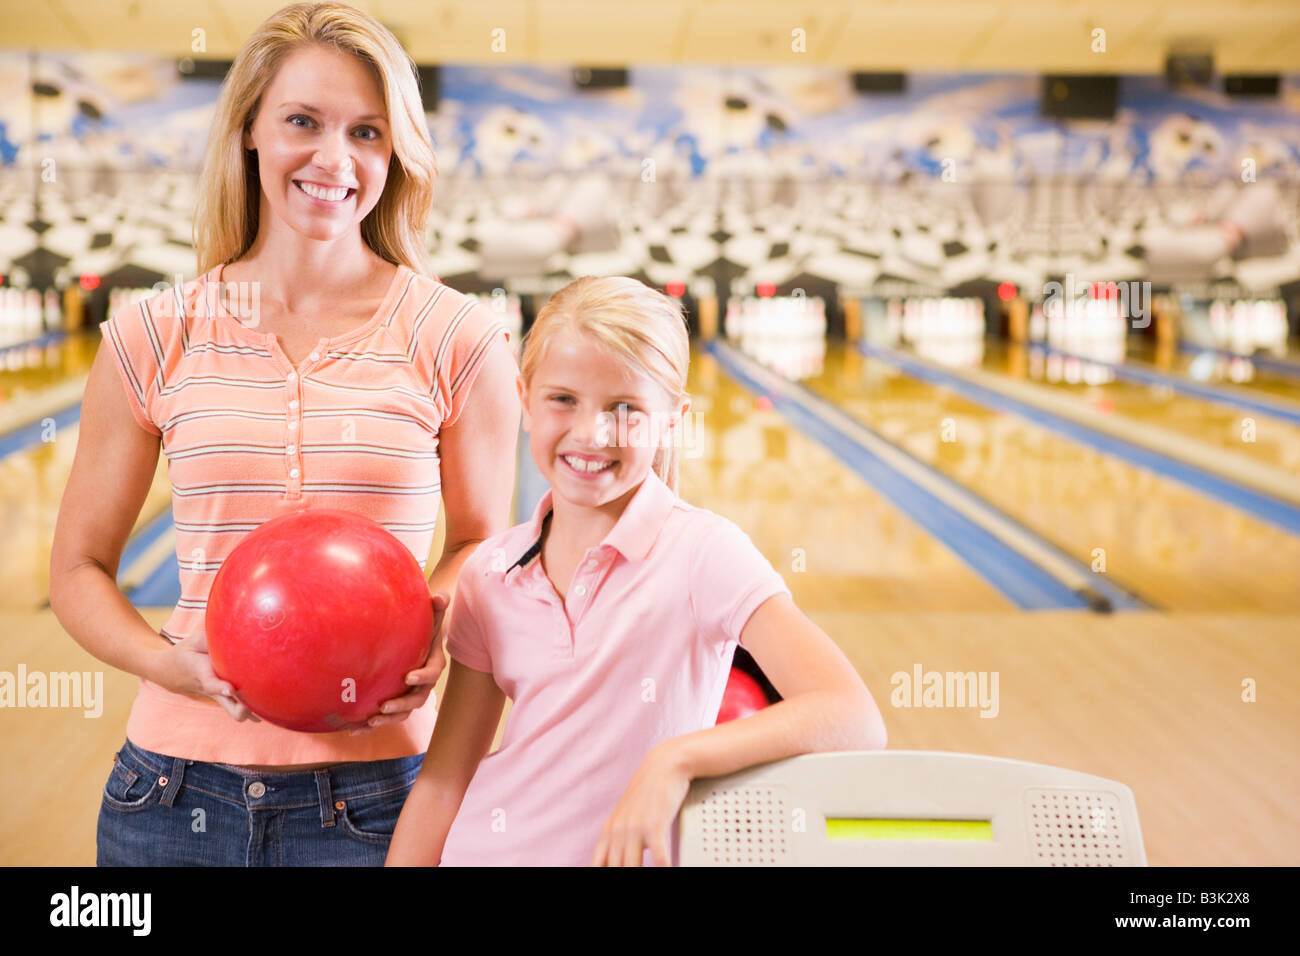 Woman and young girl in bowling alley holding ball and smiling Stock Photo